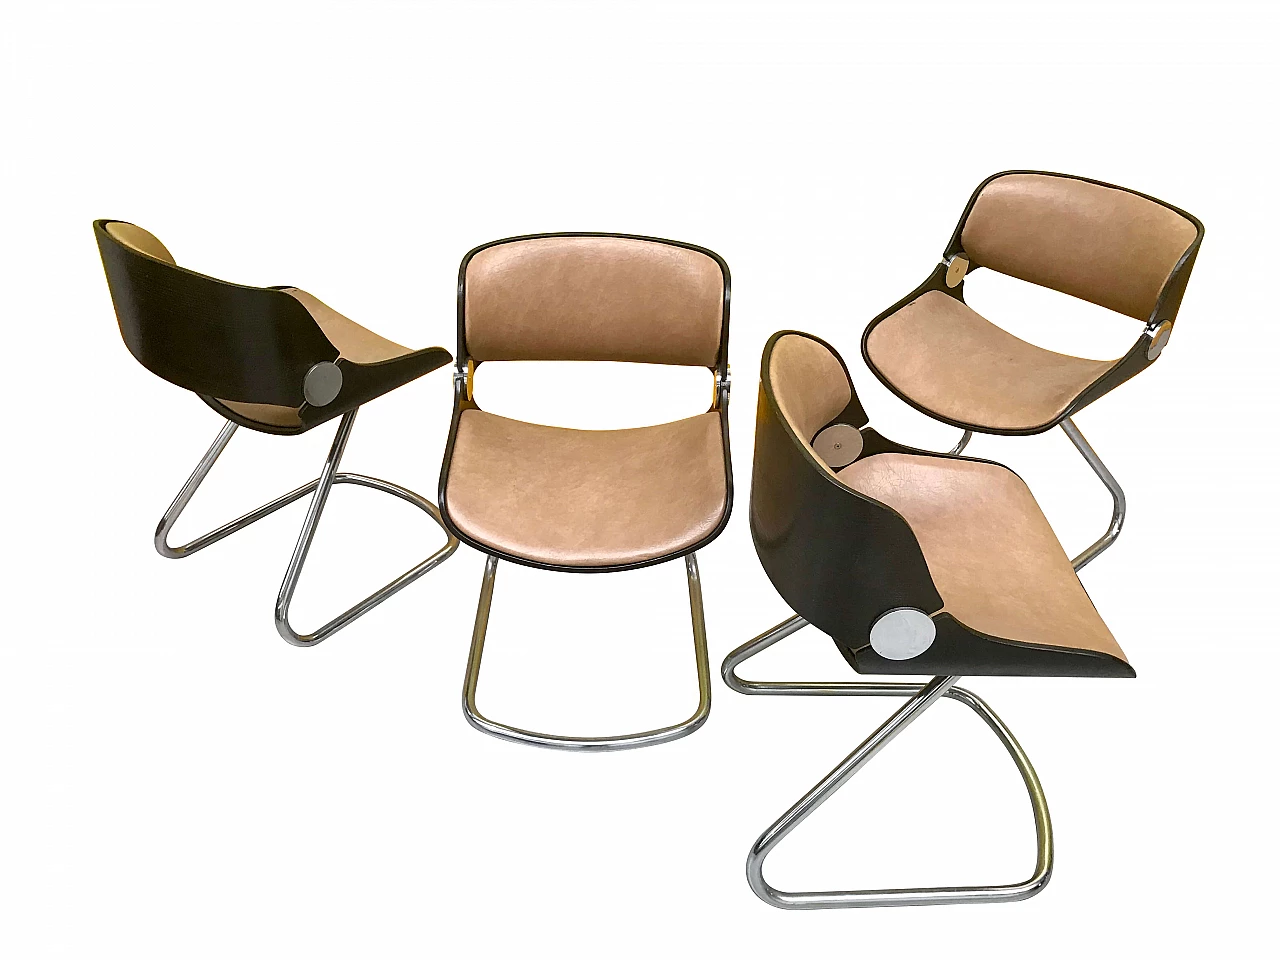 4 Chairs by Etienne Fermigier chairs in bended wood, faux leather and chromed tubular, 70s 1164712